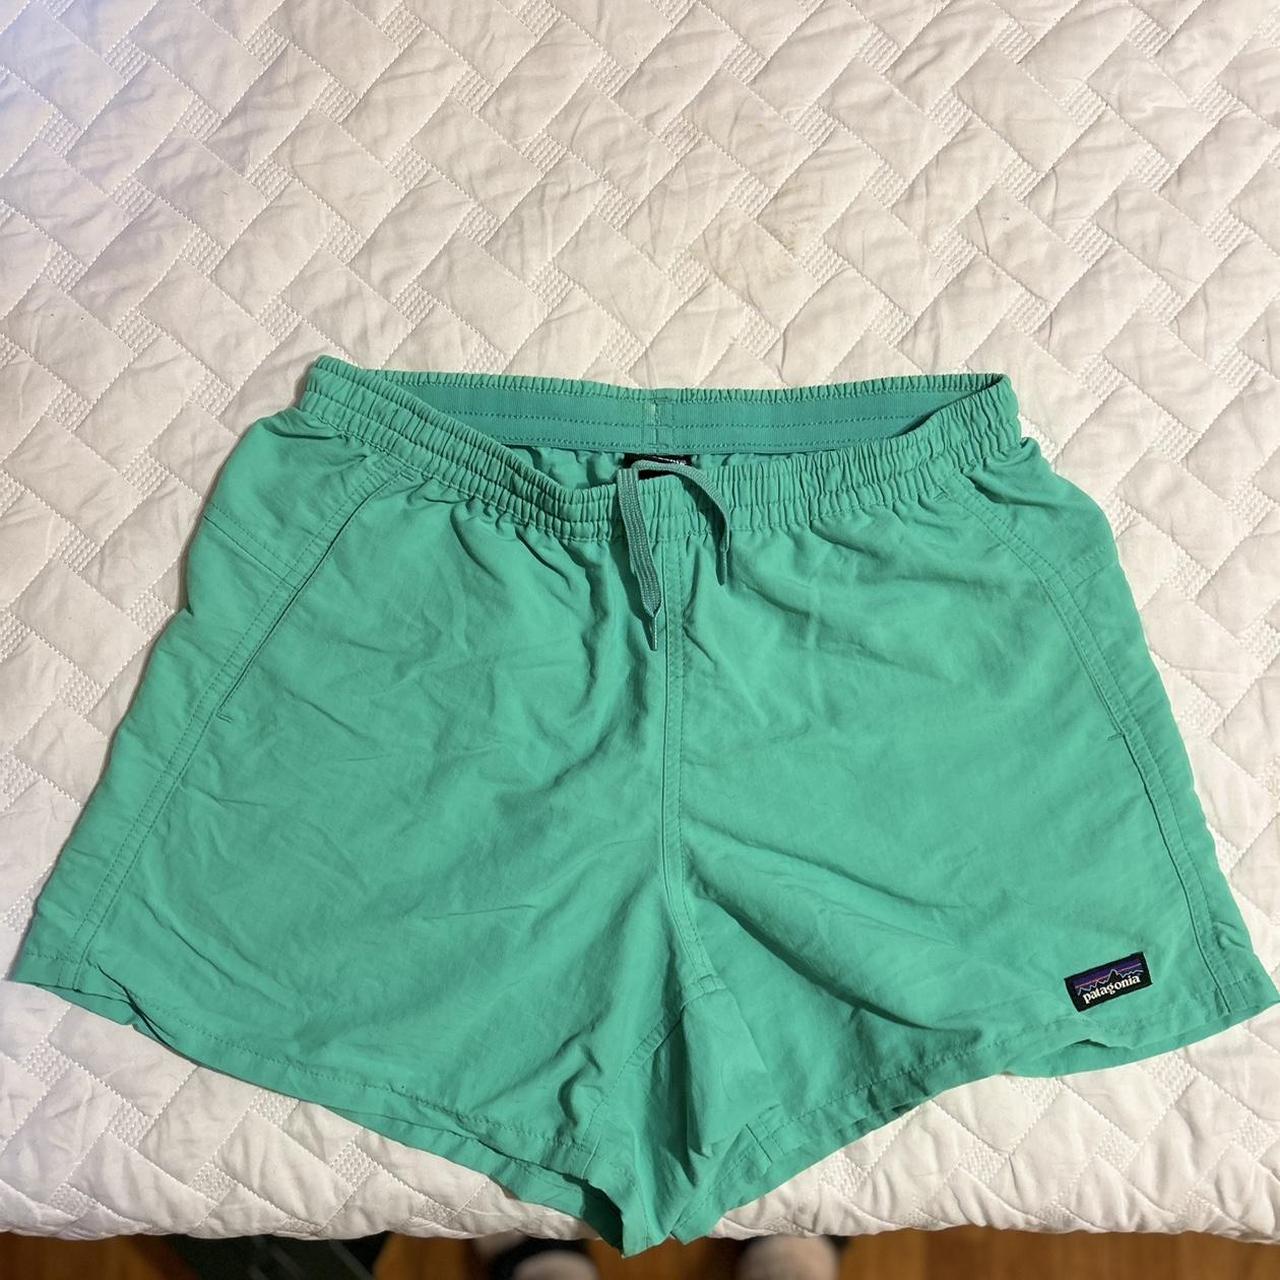 Excellent condition green Patagonia shorts they’re... - Depop